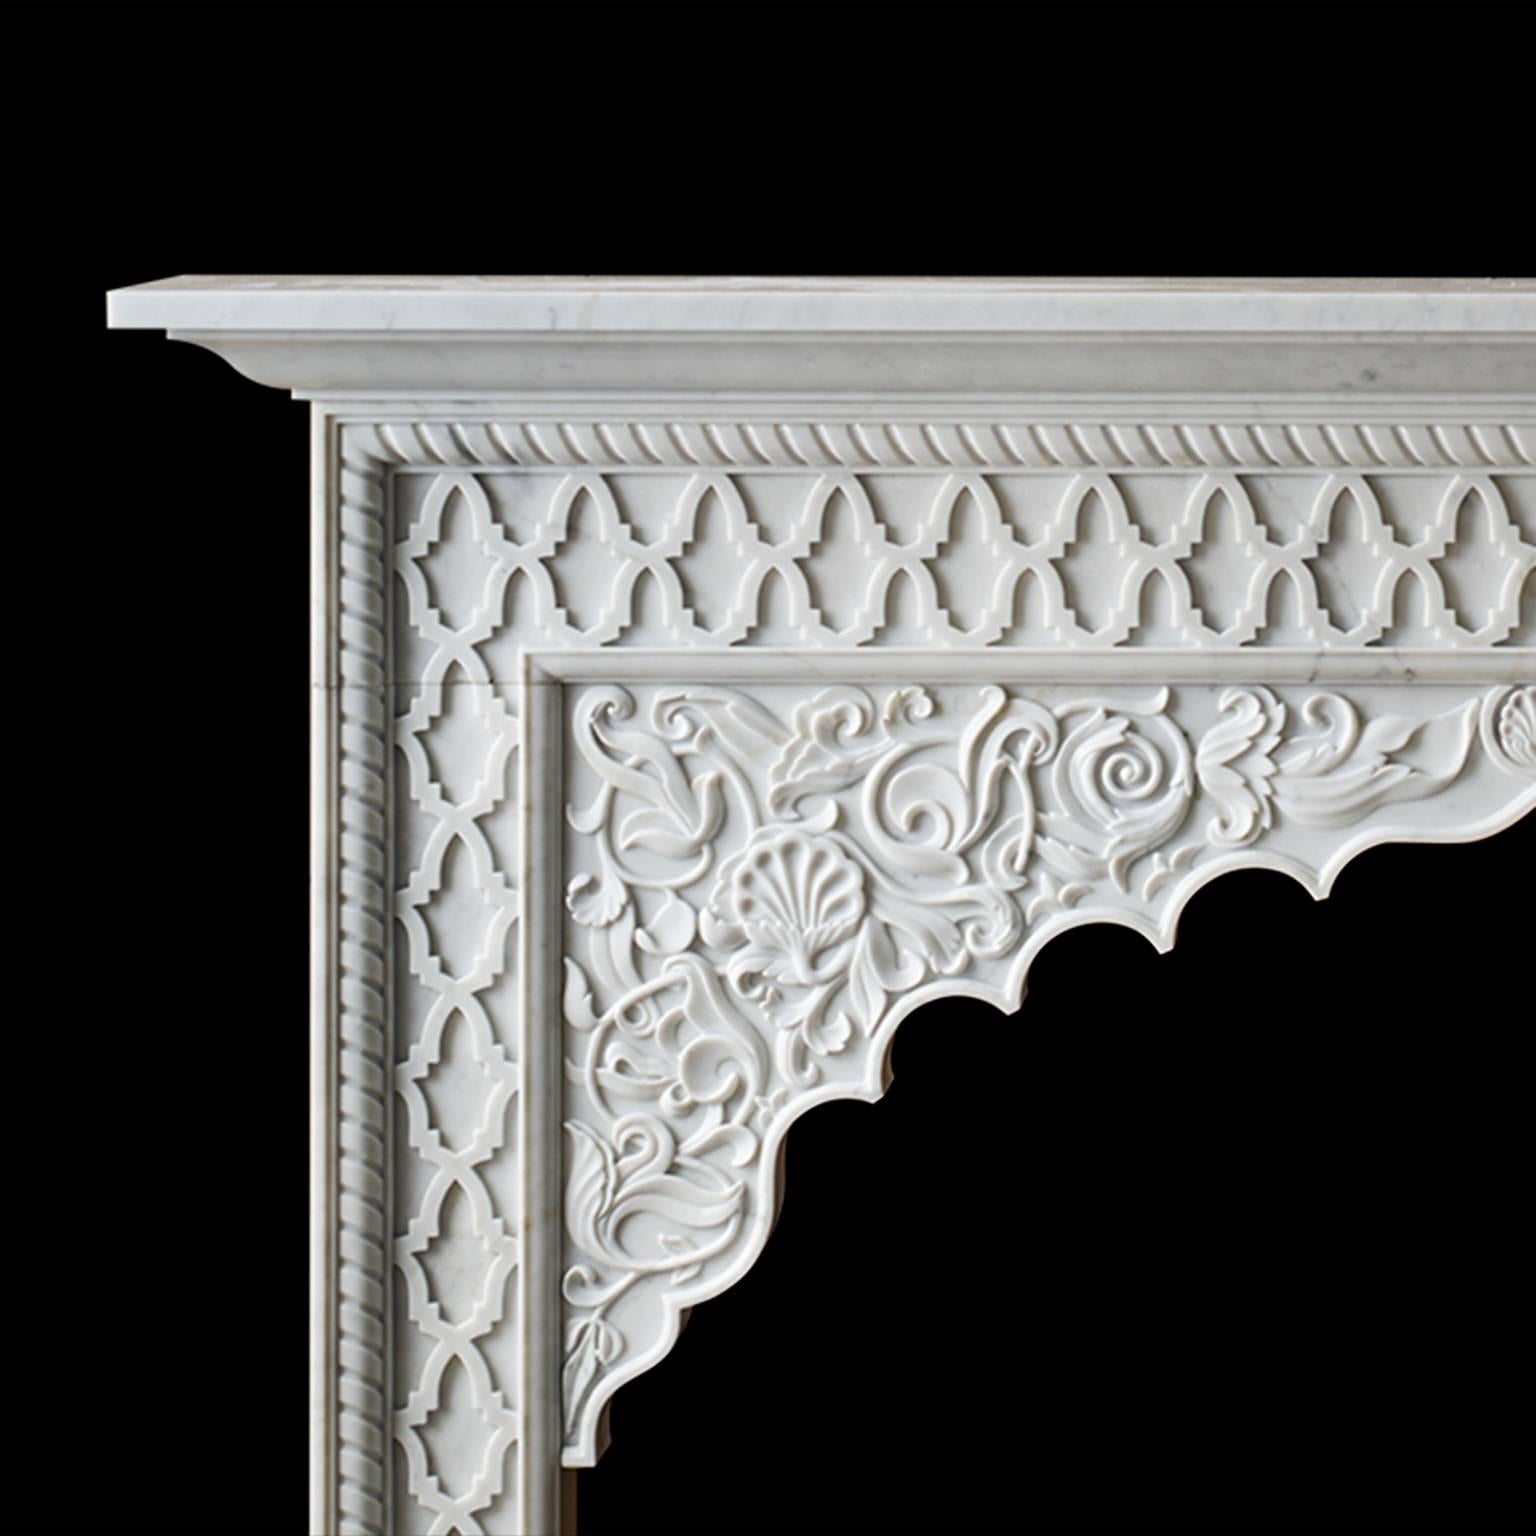 The Sammezzano, from Chesney's Alexa Hampton collection. Inspired by the Moorish architecture of the Castle of Sammezano in Tuscany, this mantelpiece is hand-carved in Carrara marble with interlacing lattice work, floral embellishment, and a